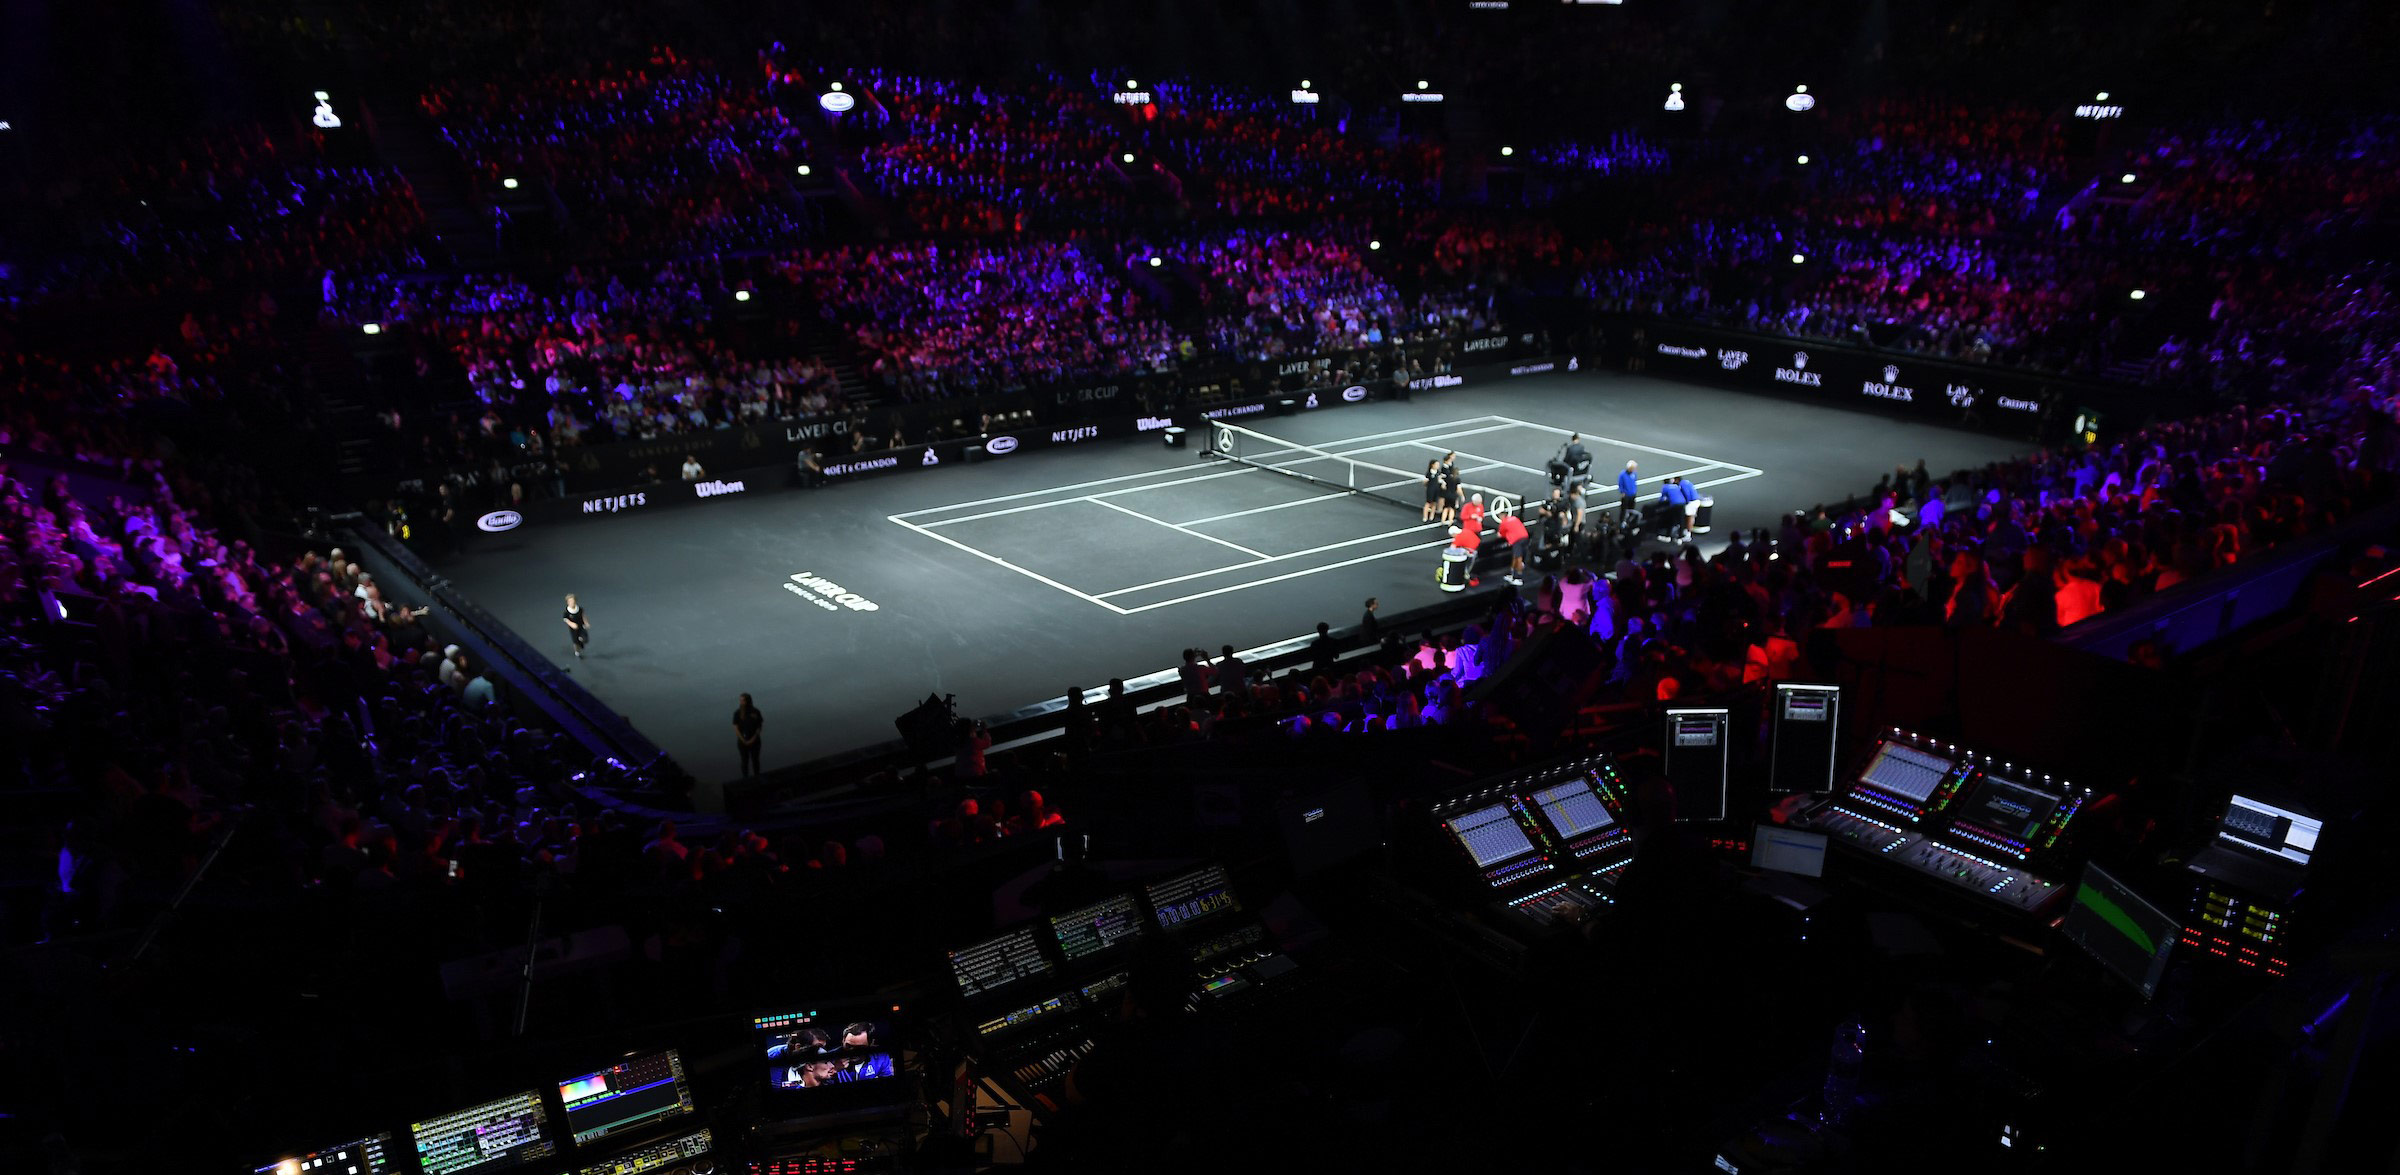 How to watch the Laver Cup 2023 Laver Cup